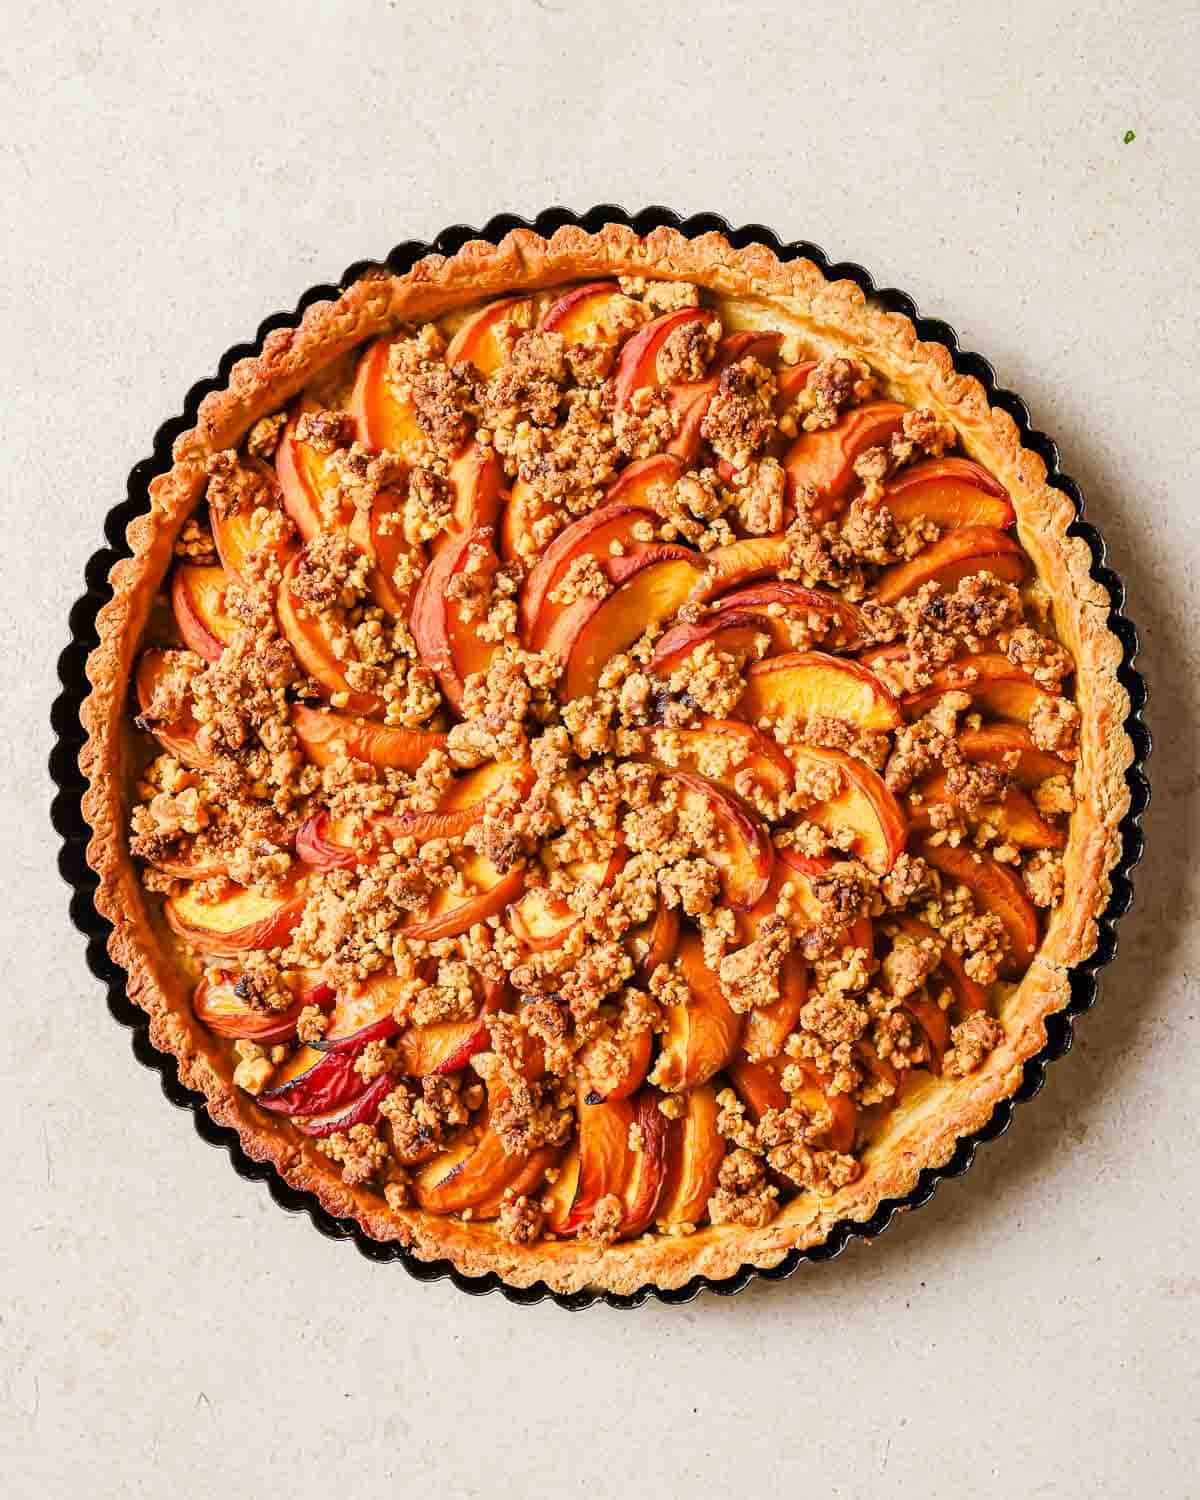 A freshly baked peach tart in a fluted tart pan, topped with sliced peaches and crumble, on a light beige surface.